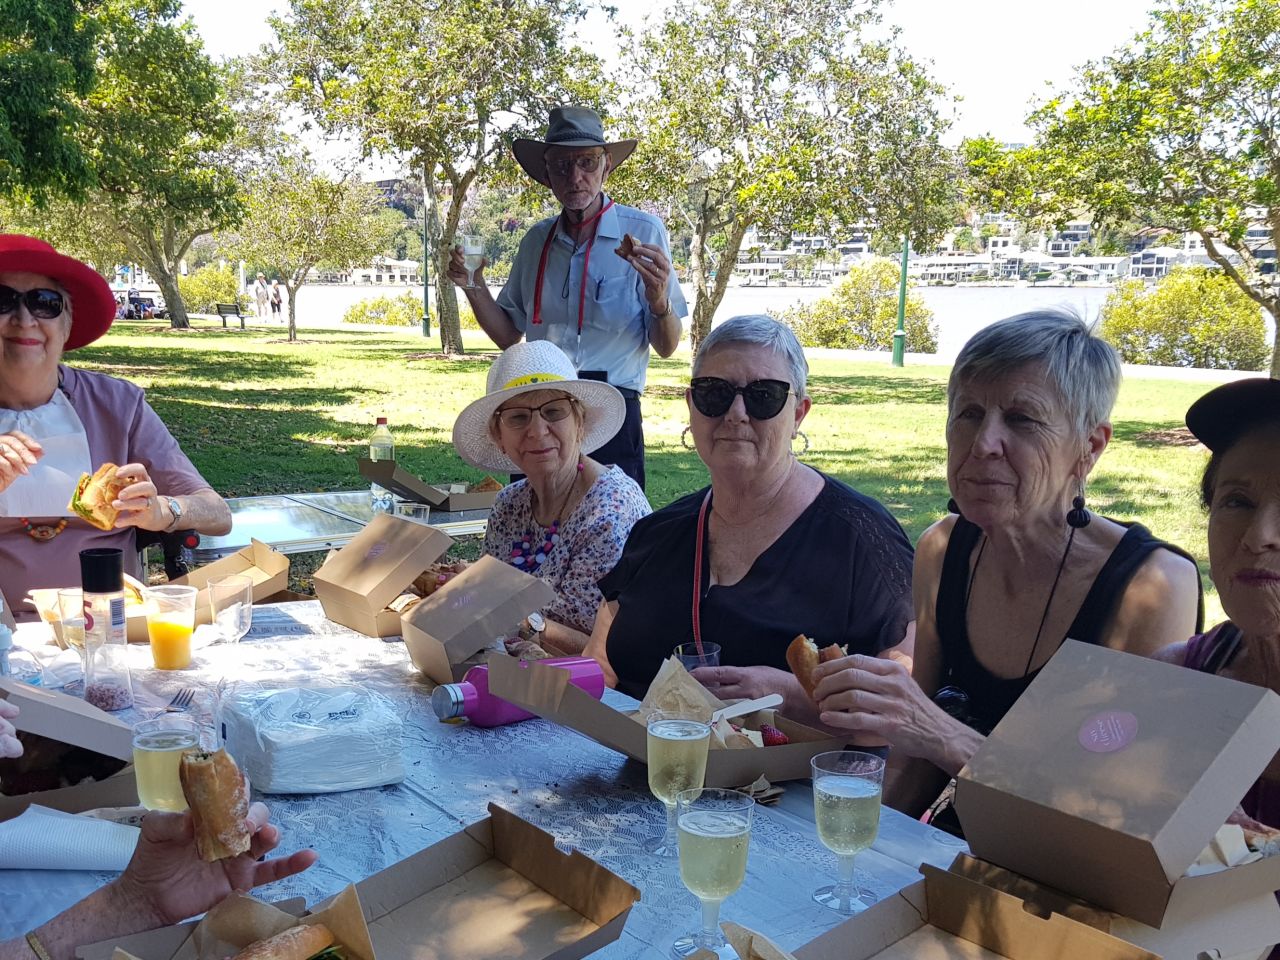 This is a serious business - good wine, good food & good company in our beautiful city! A most enjoyable day!
“This project kindly supported by the Lord Mayor’s Community Fund and Central Ward Councillor”
October 2022.